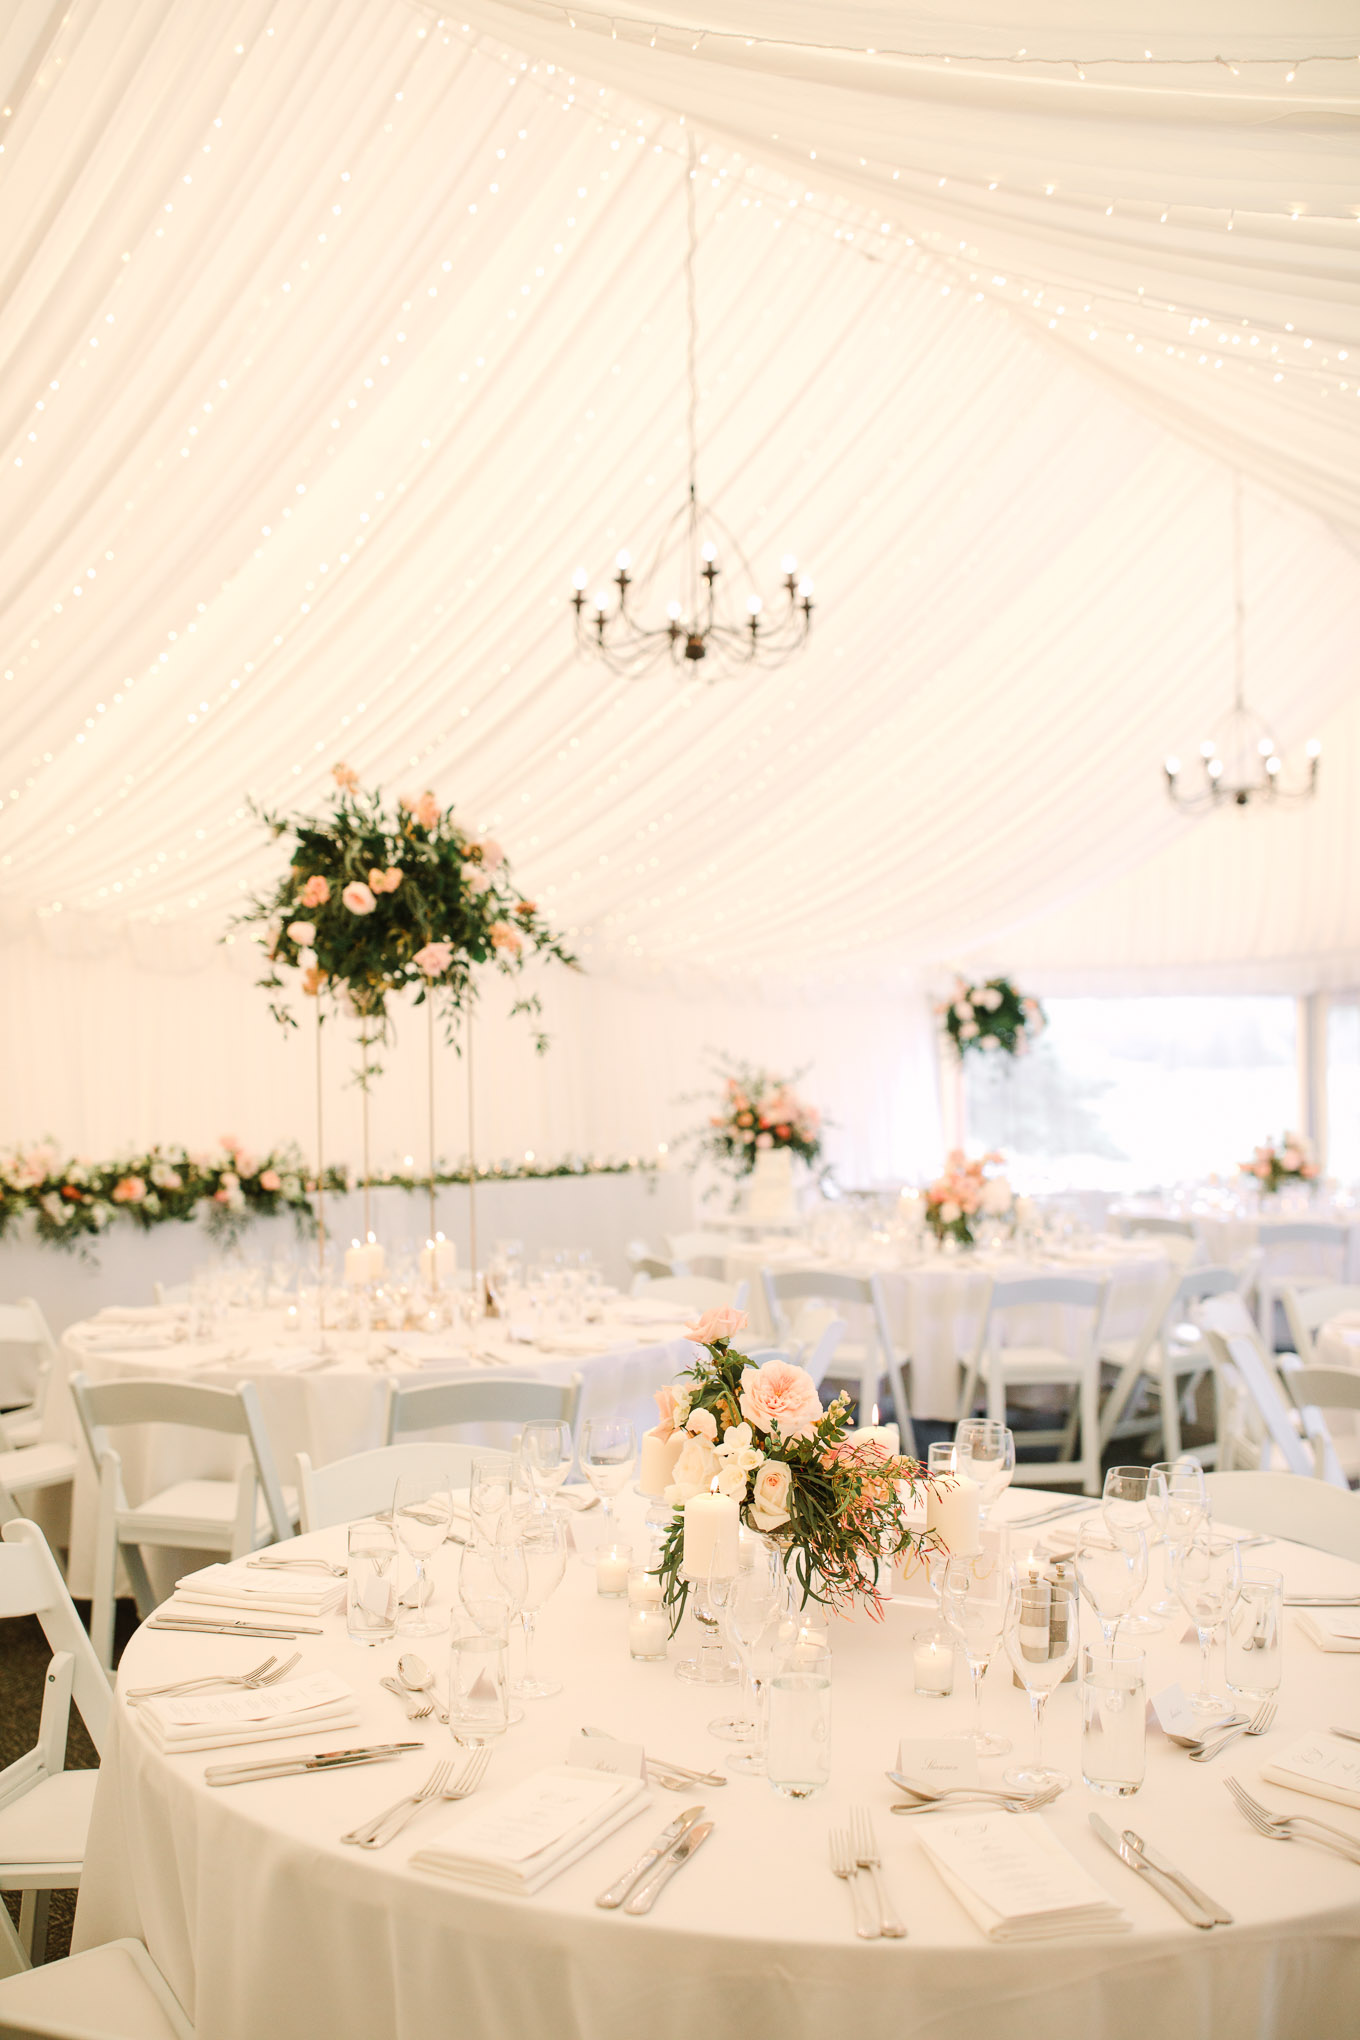 Tented wedding reception at Millbrook Resort Queenstown New Zealand wedding by Mary Costa Photography | www.marycostaweddings.com